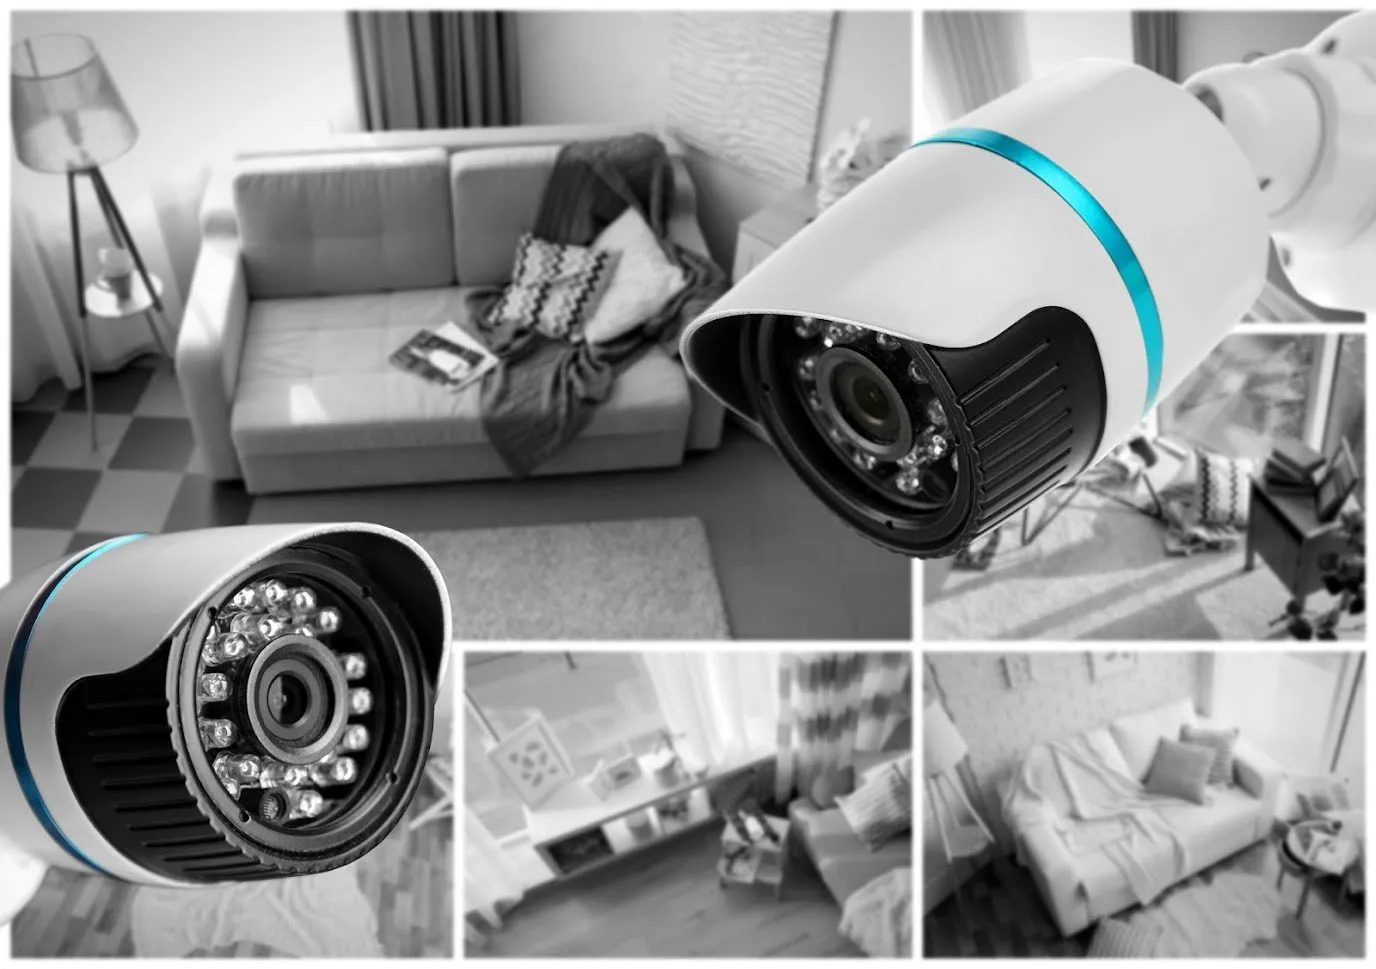 The Best Places to Install Security Cameras in Your Home